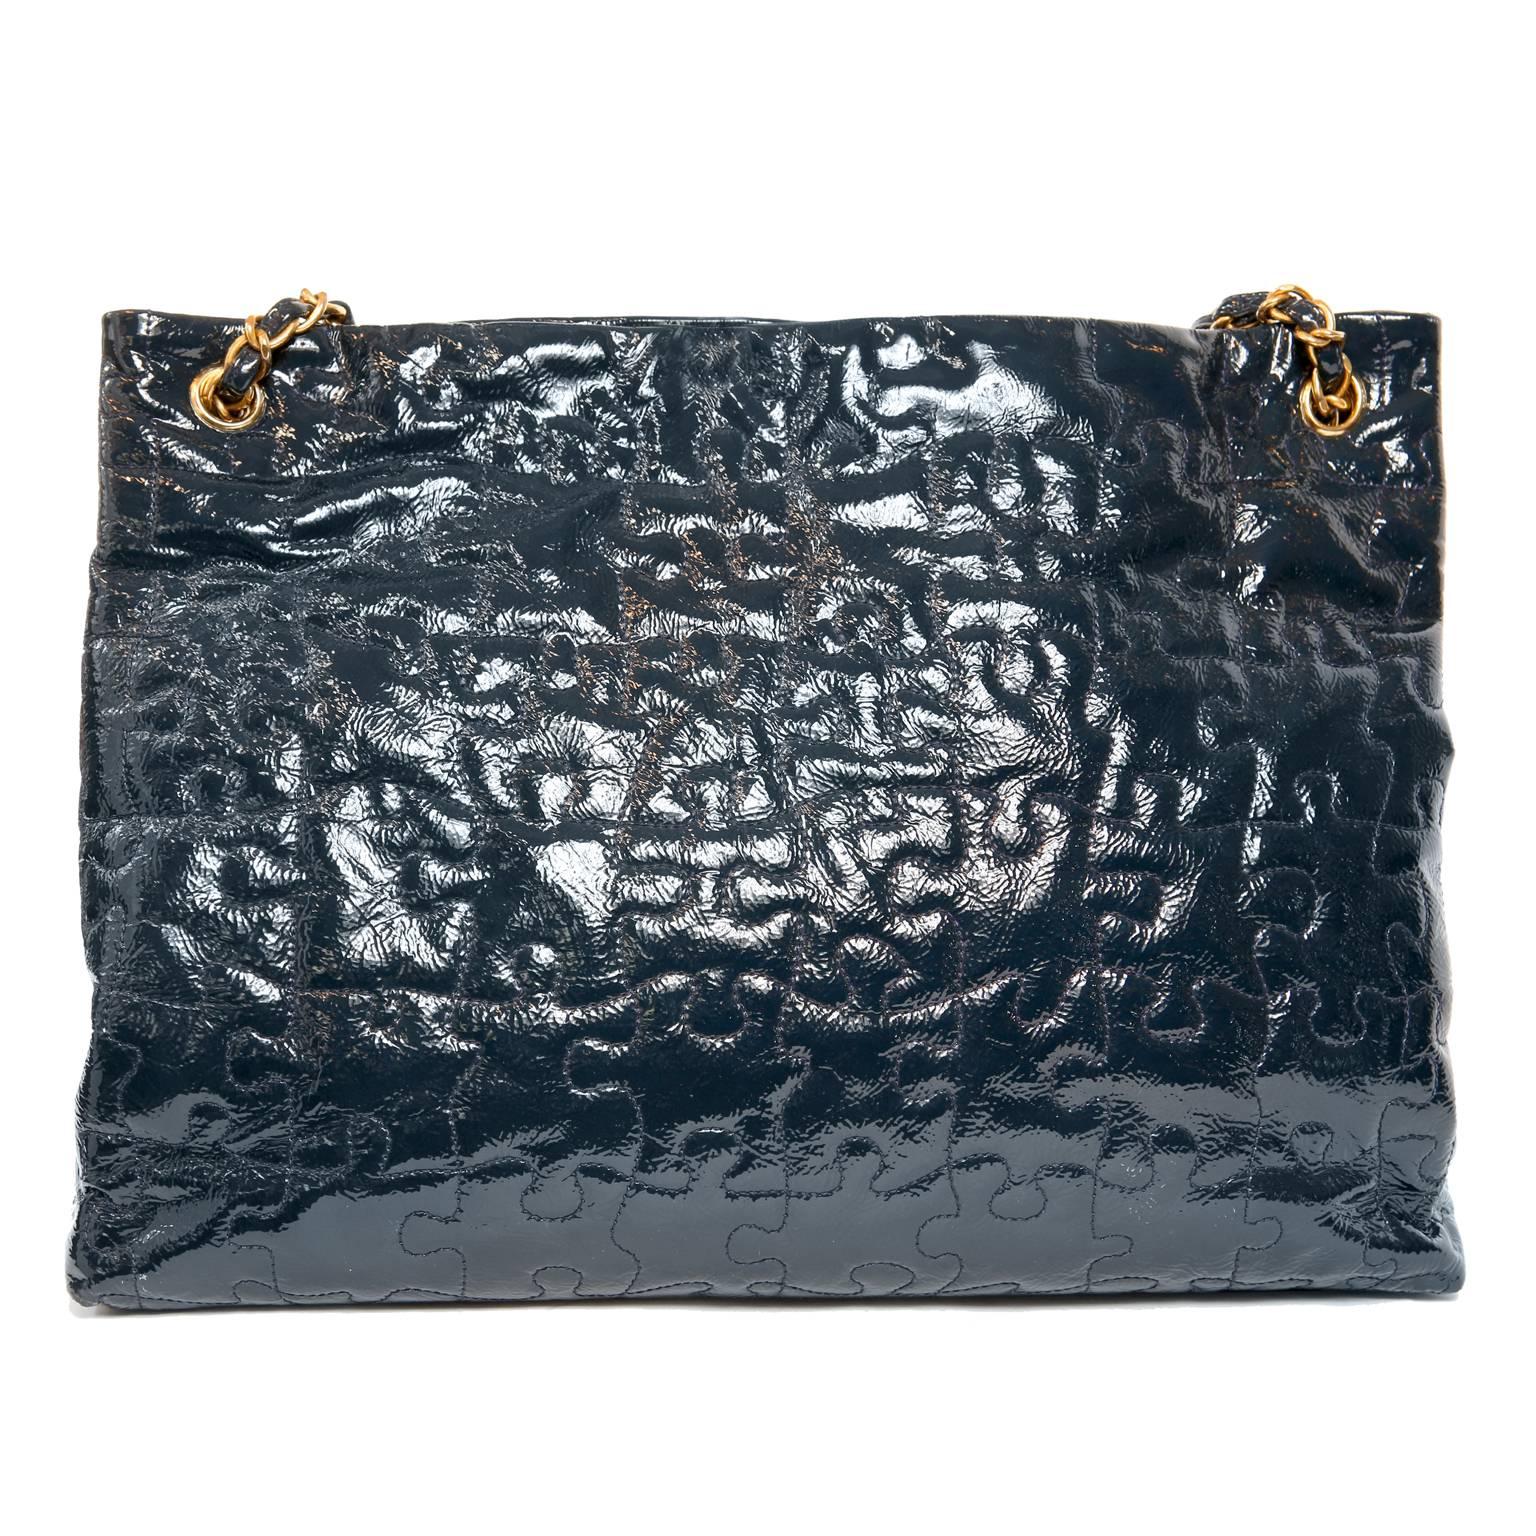 Chanel Navy Patent Leather Puzzle Tote- Pristine
Spacious and durable, Chanel’s Navy Blue Patent Puzzle Tote is perfect for daily enjoyment.
Navy Blue patent leather is stitched in a jigsaw puzzle pattern.  Double leather and chain entwined straps